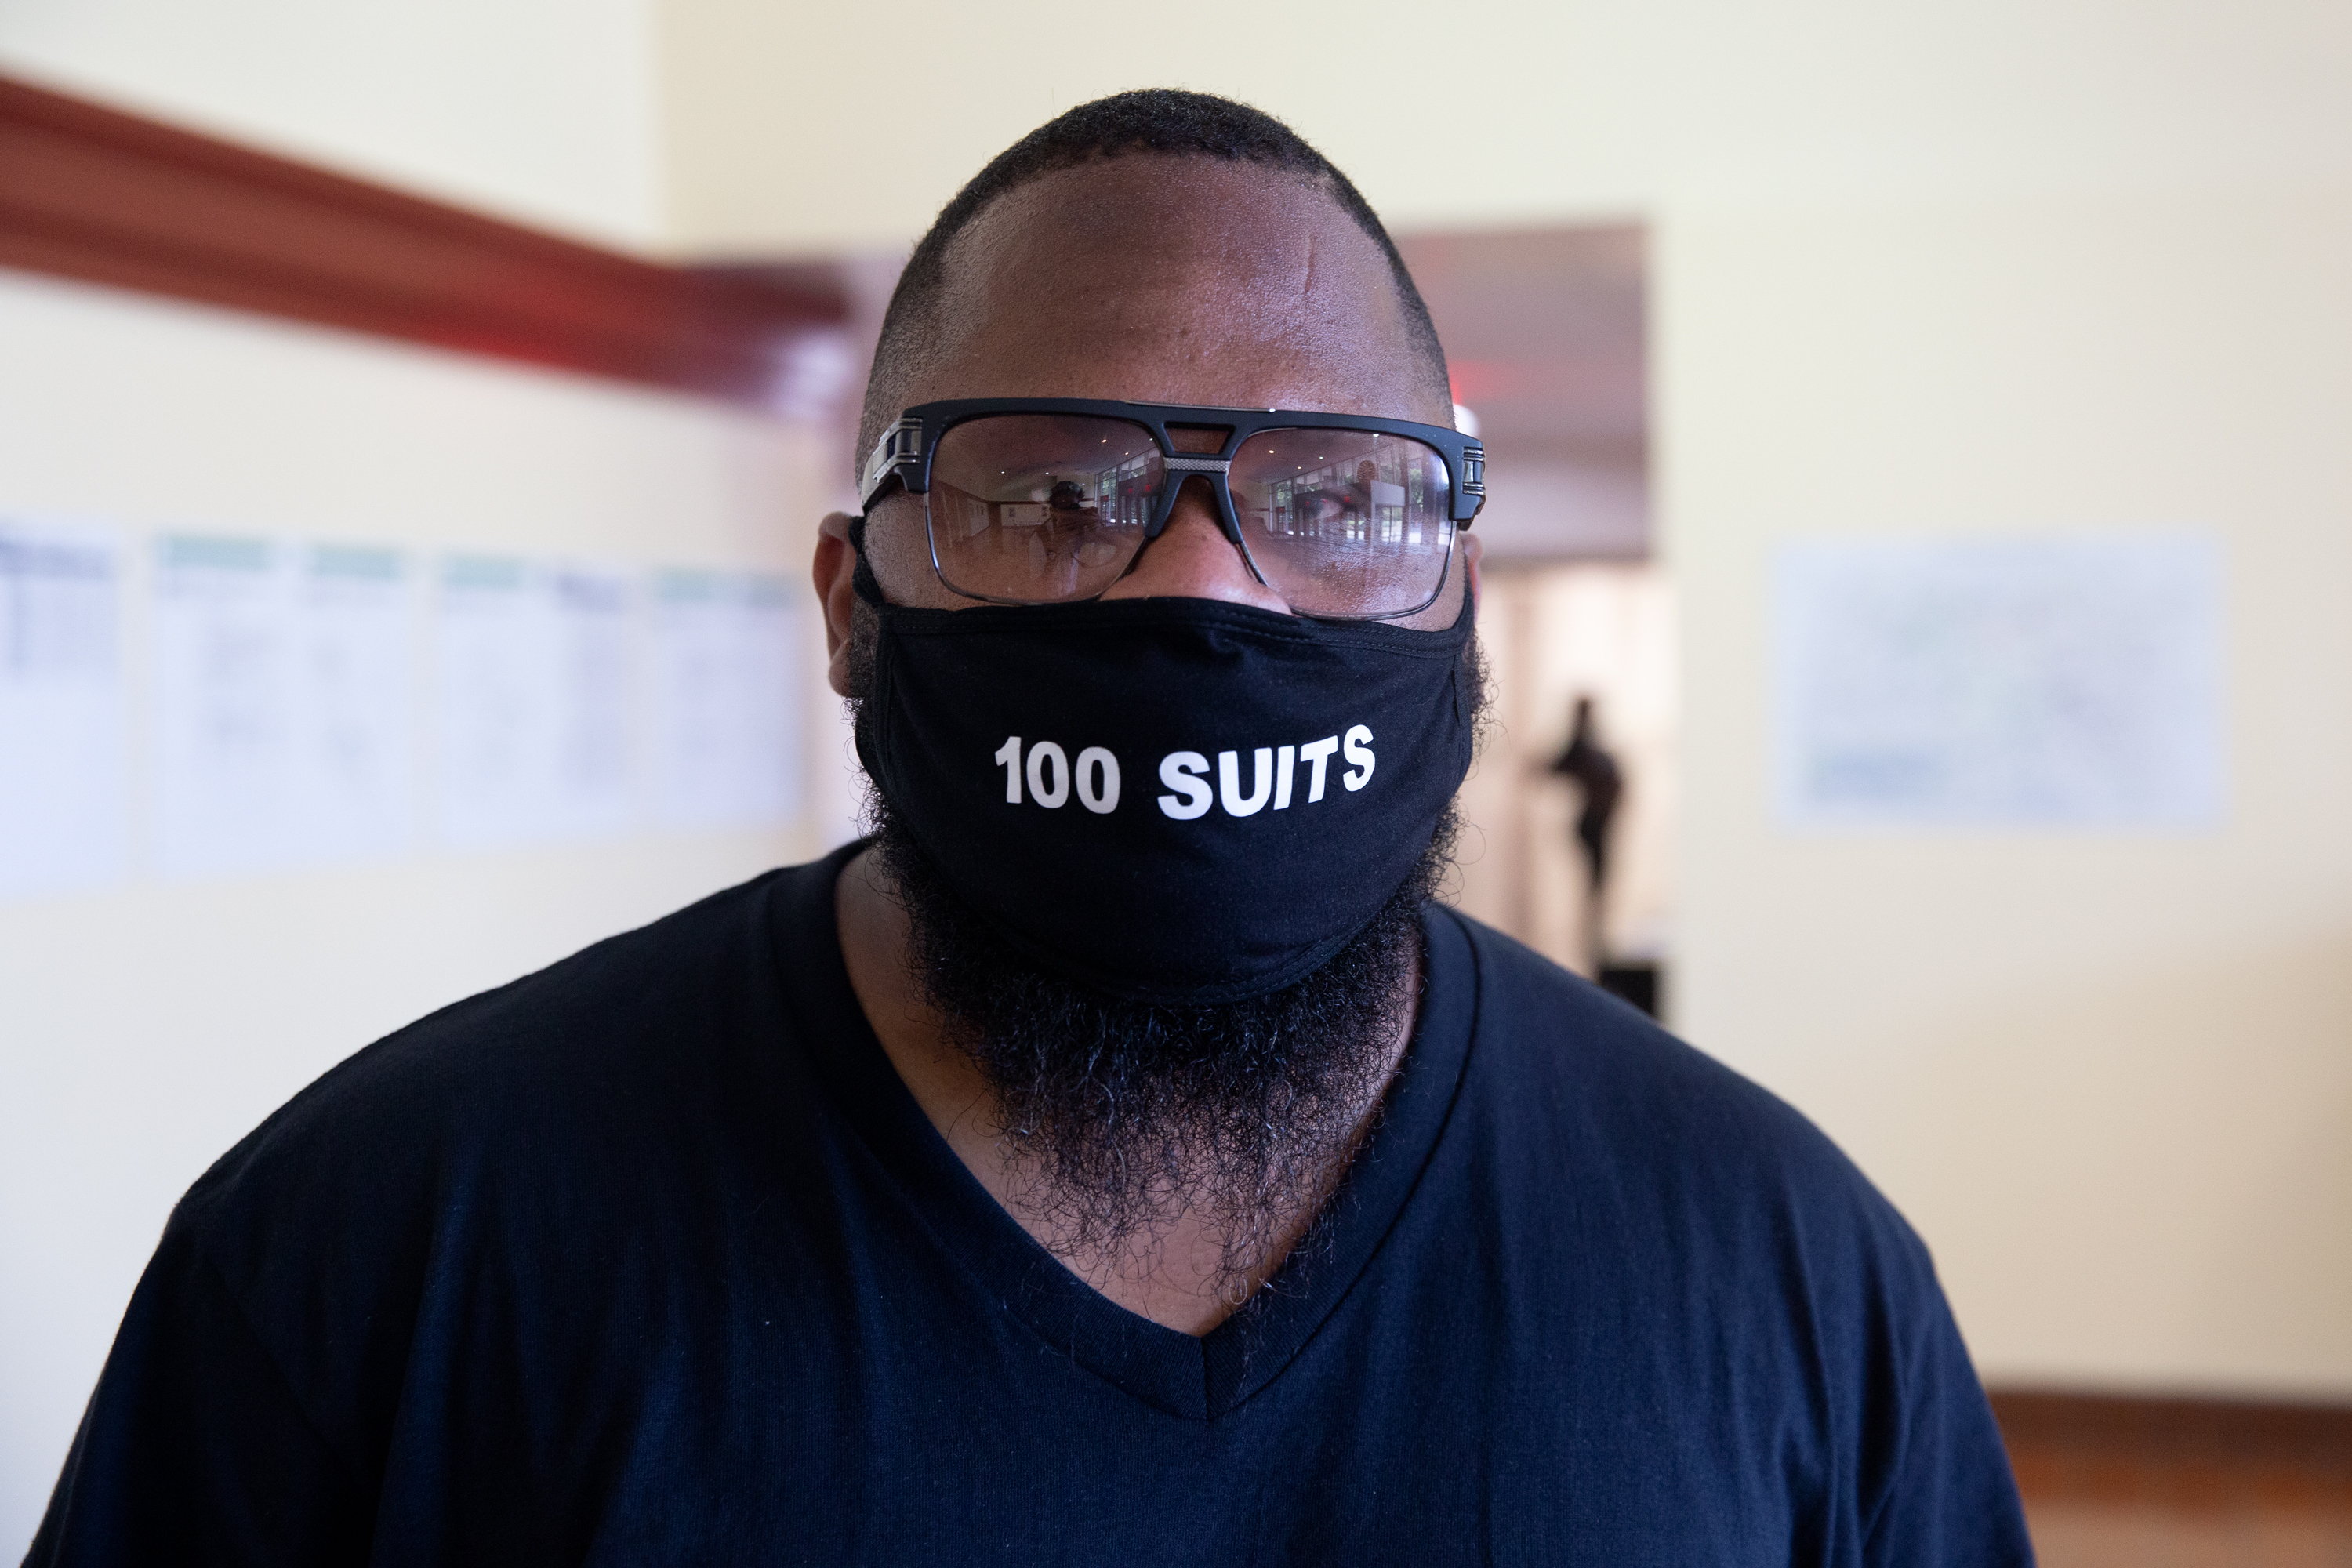 Kevin Livingston runs the nonprofit 100 Suits for 100 Men, which provides business attire to underprivileged men and women, July 9, 2020.